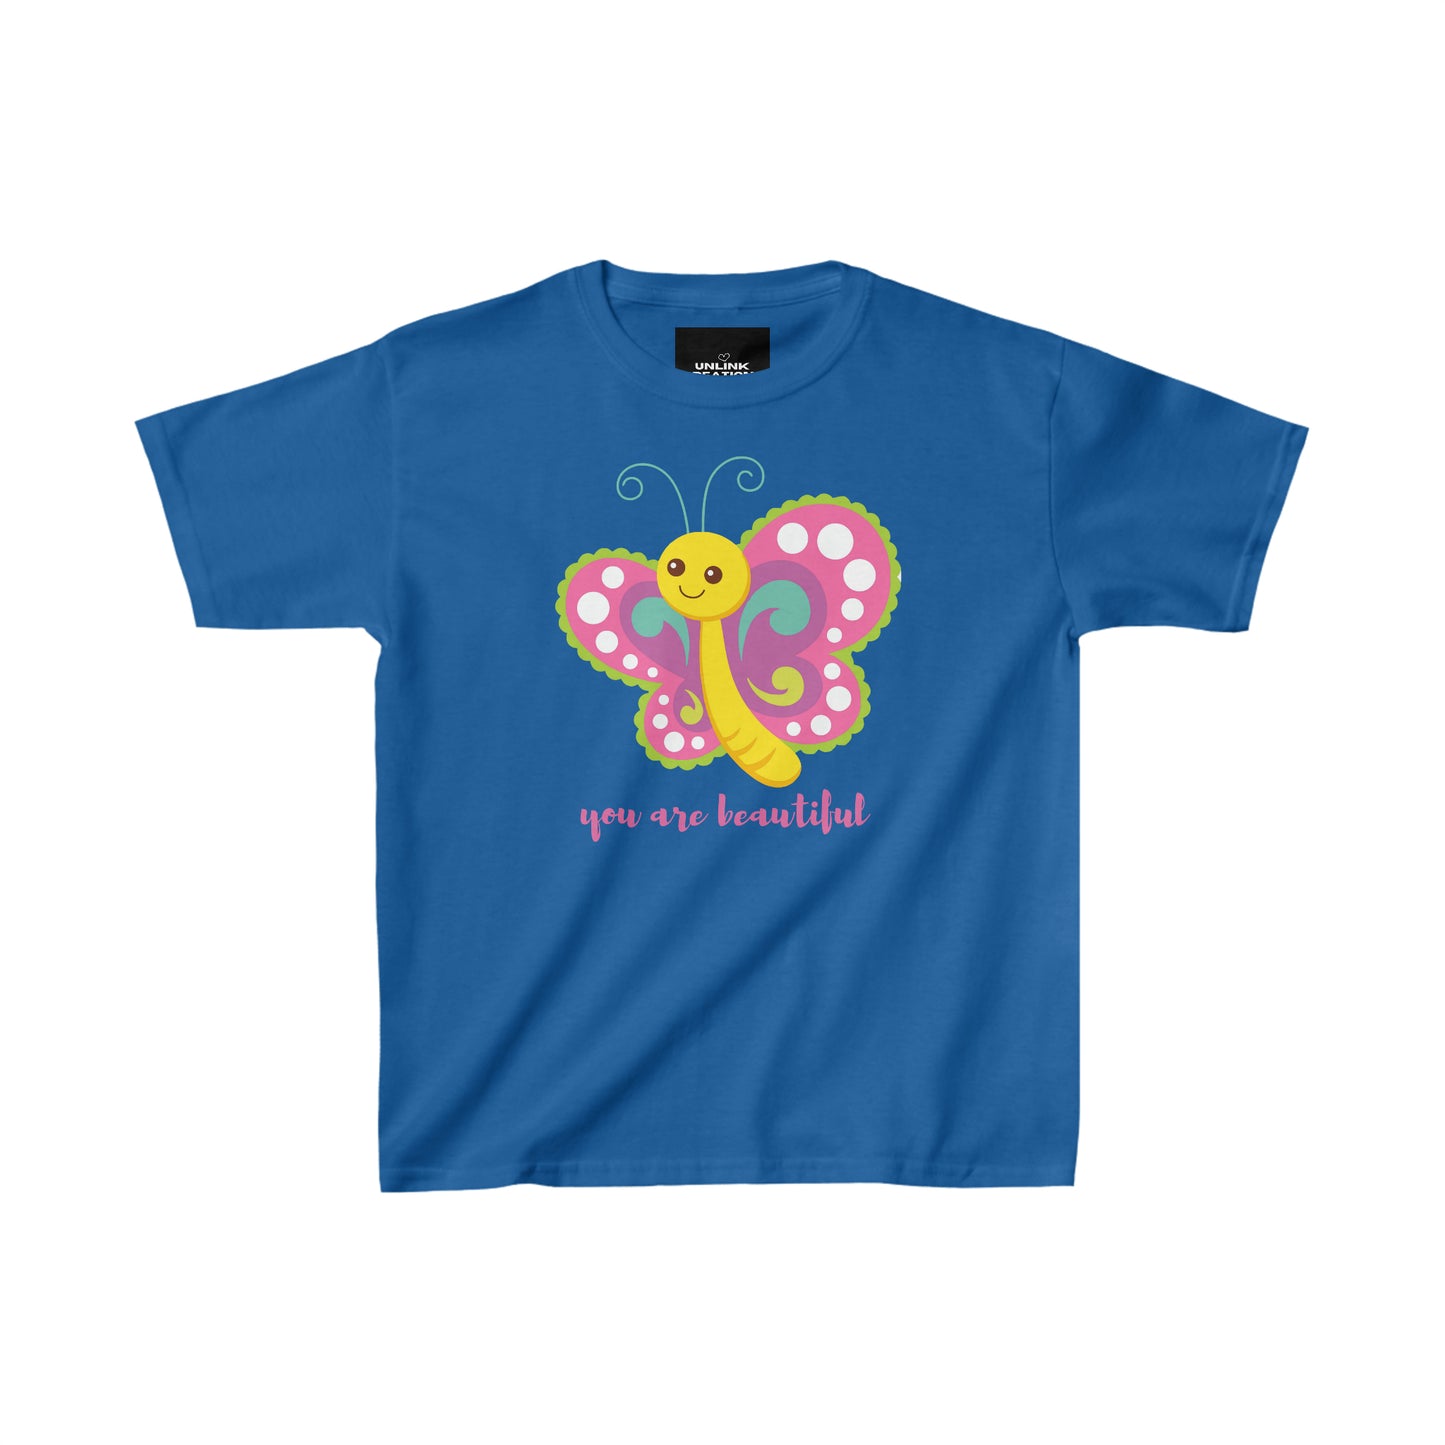 A cute butterfly reminding you that “you are beautiful”  makes this Kids Heavy Cotton™ Tee a fun one to wear!